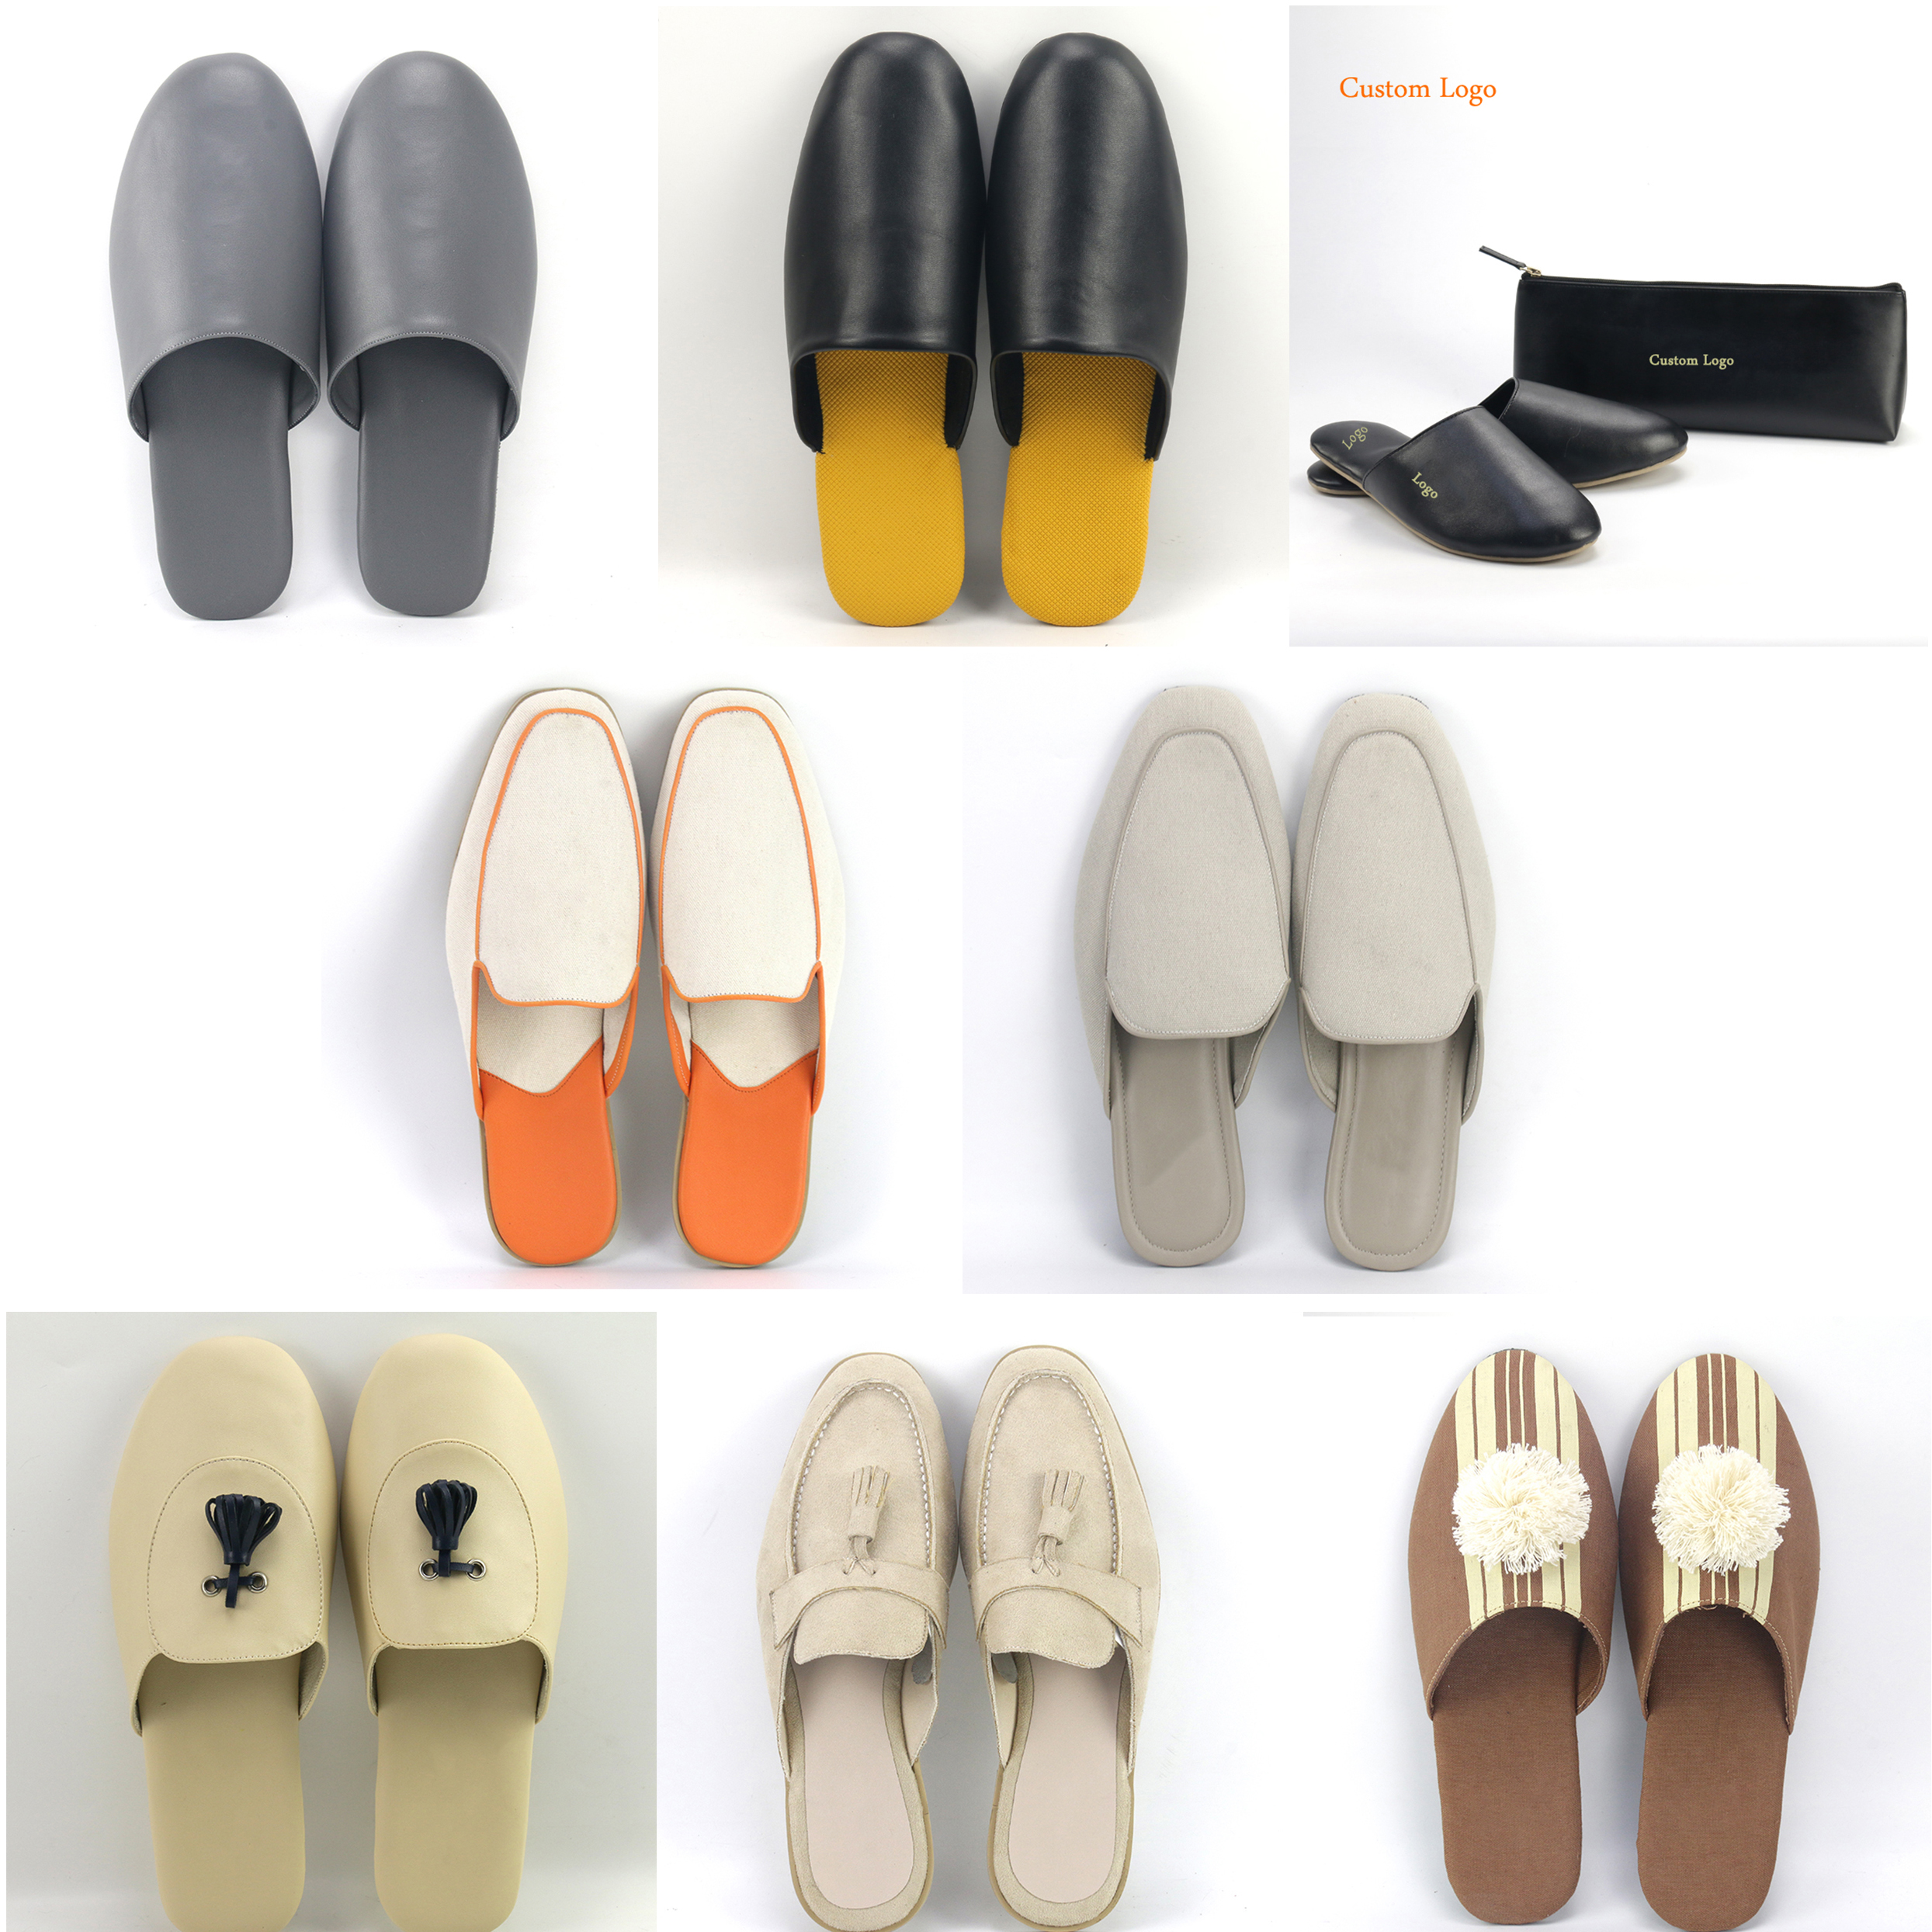 Luukse Ruglose Loafers Toevallige Plat Slippers